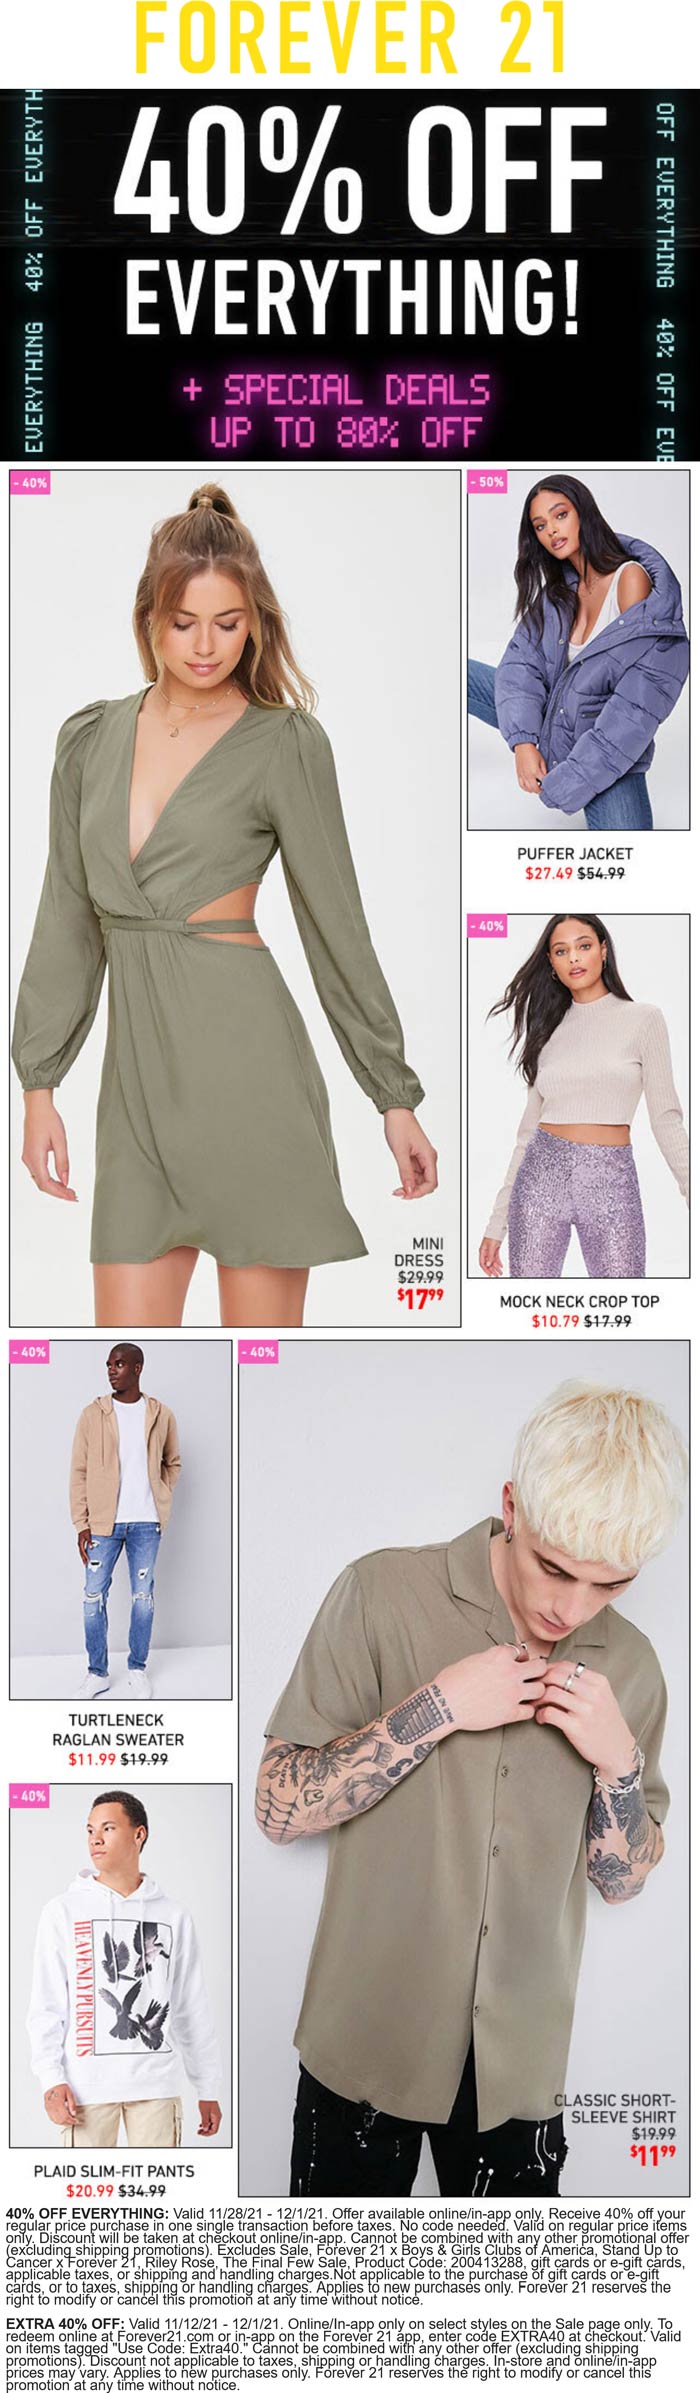 Forever 21 stores Coupon  40% off everything today at Forever 21 #forever21 